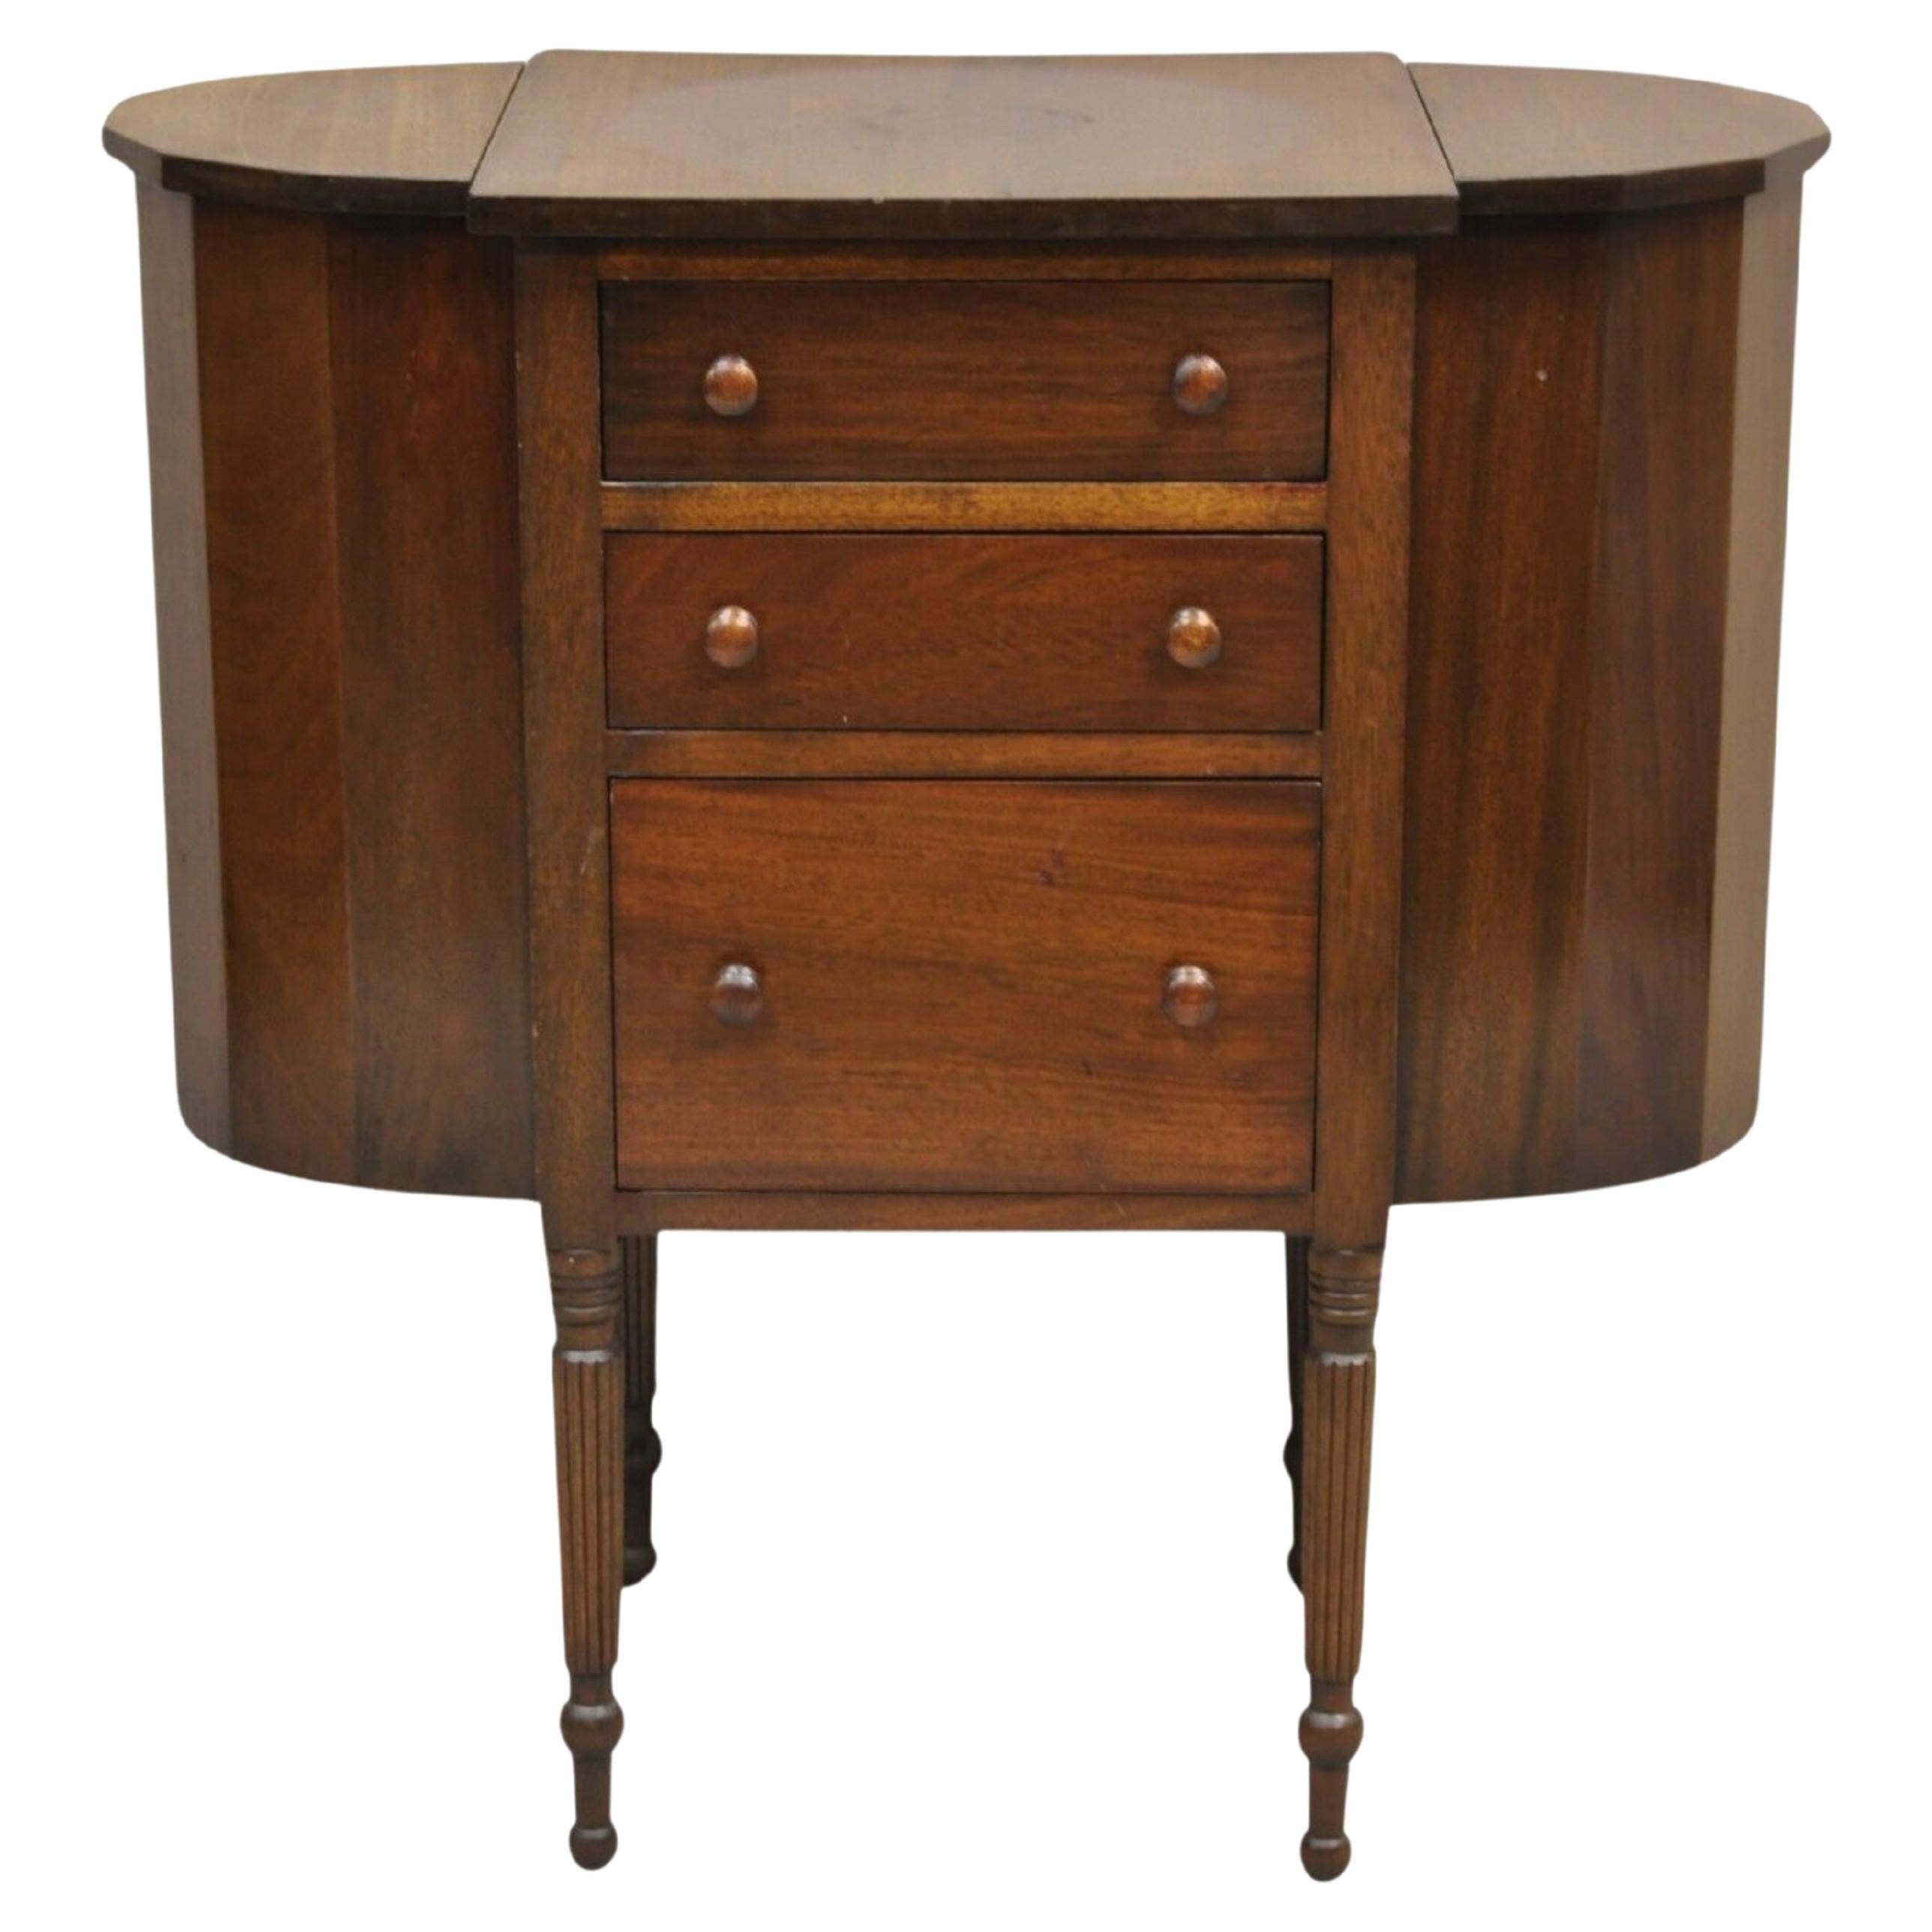 Why is it called a Martha Washington sewing cabinet?